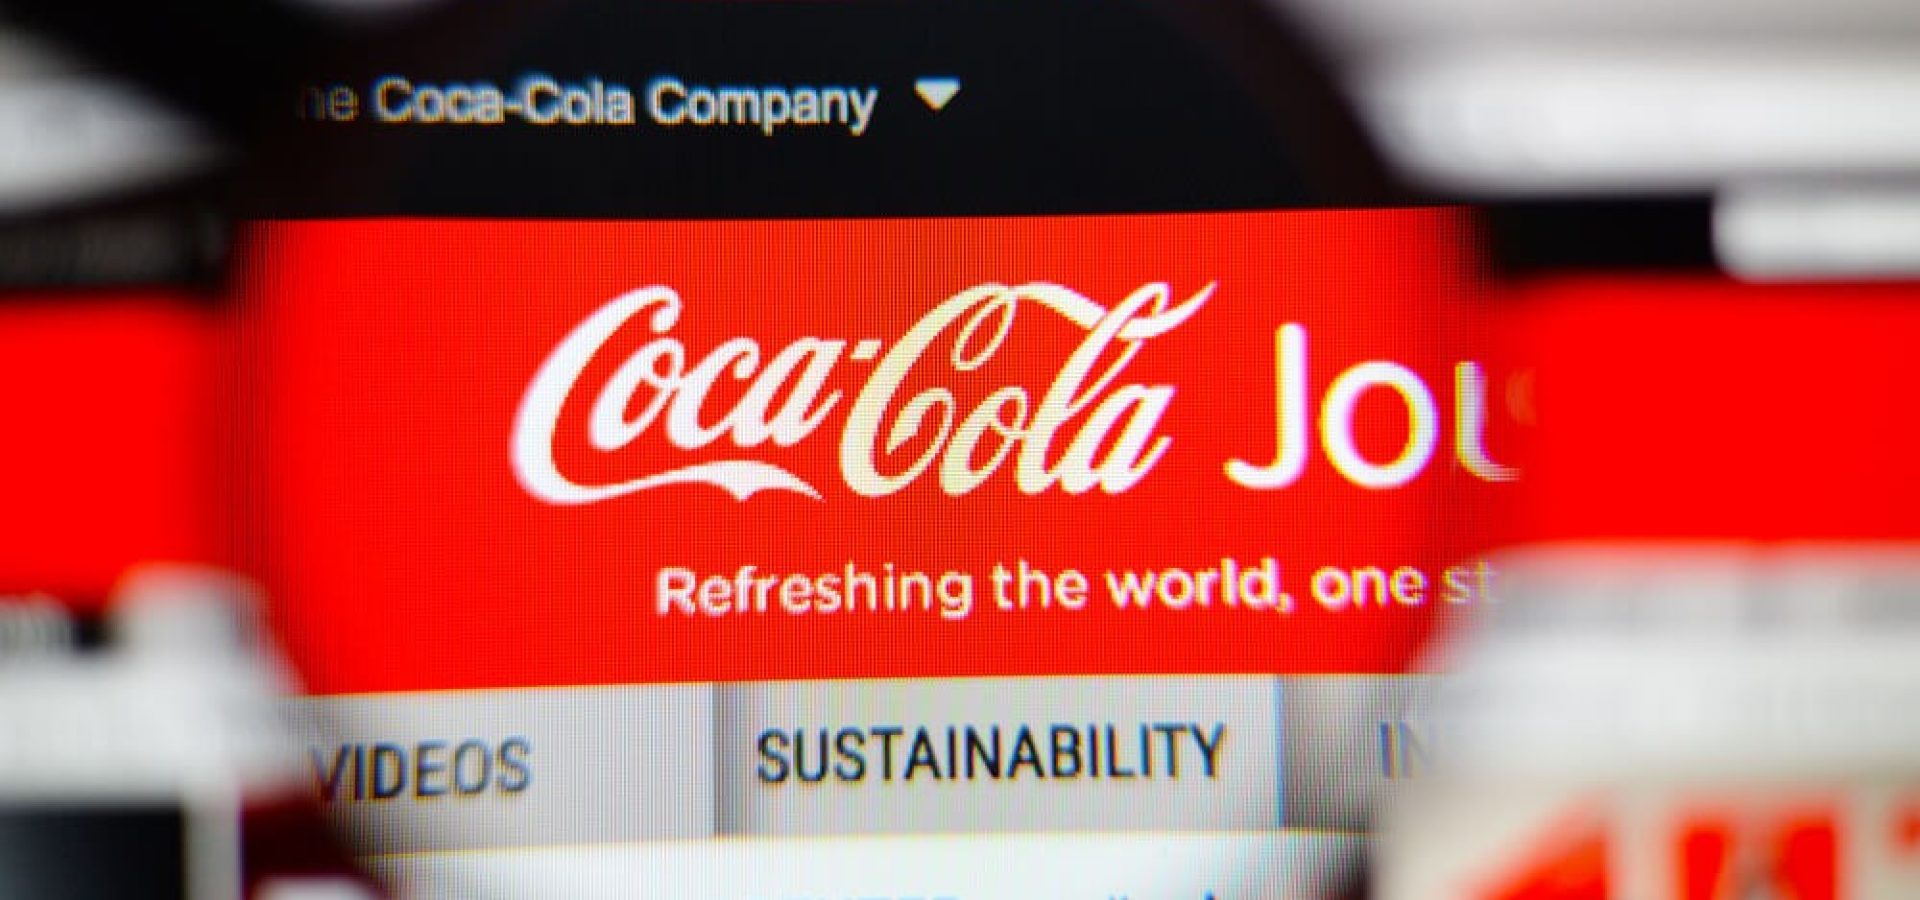 The logo of Coca-Cola stating its sustainability.